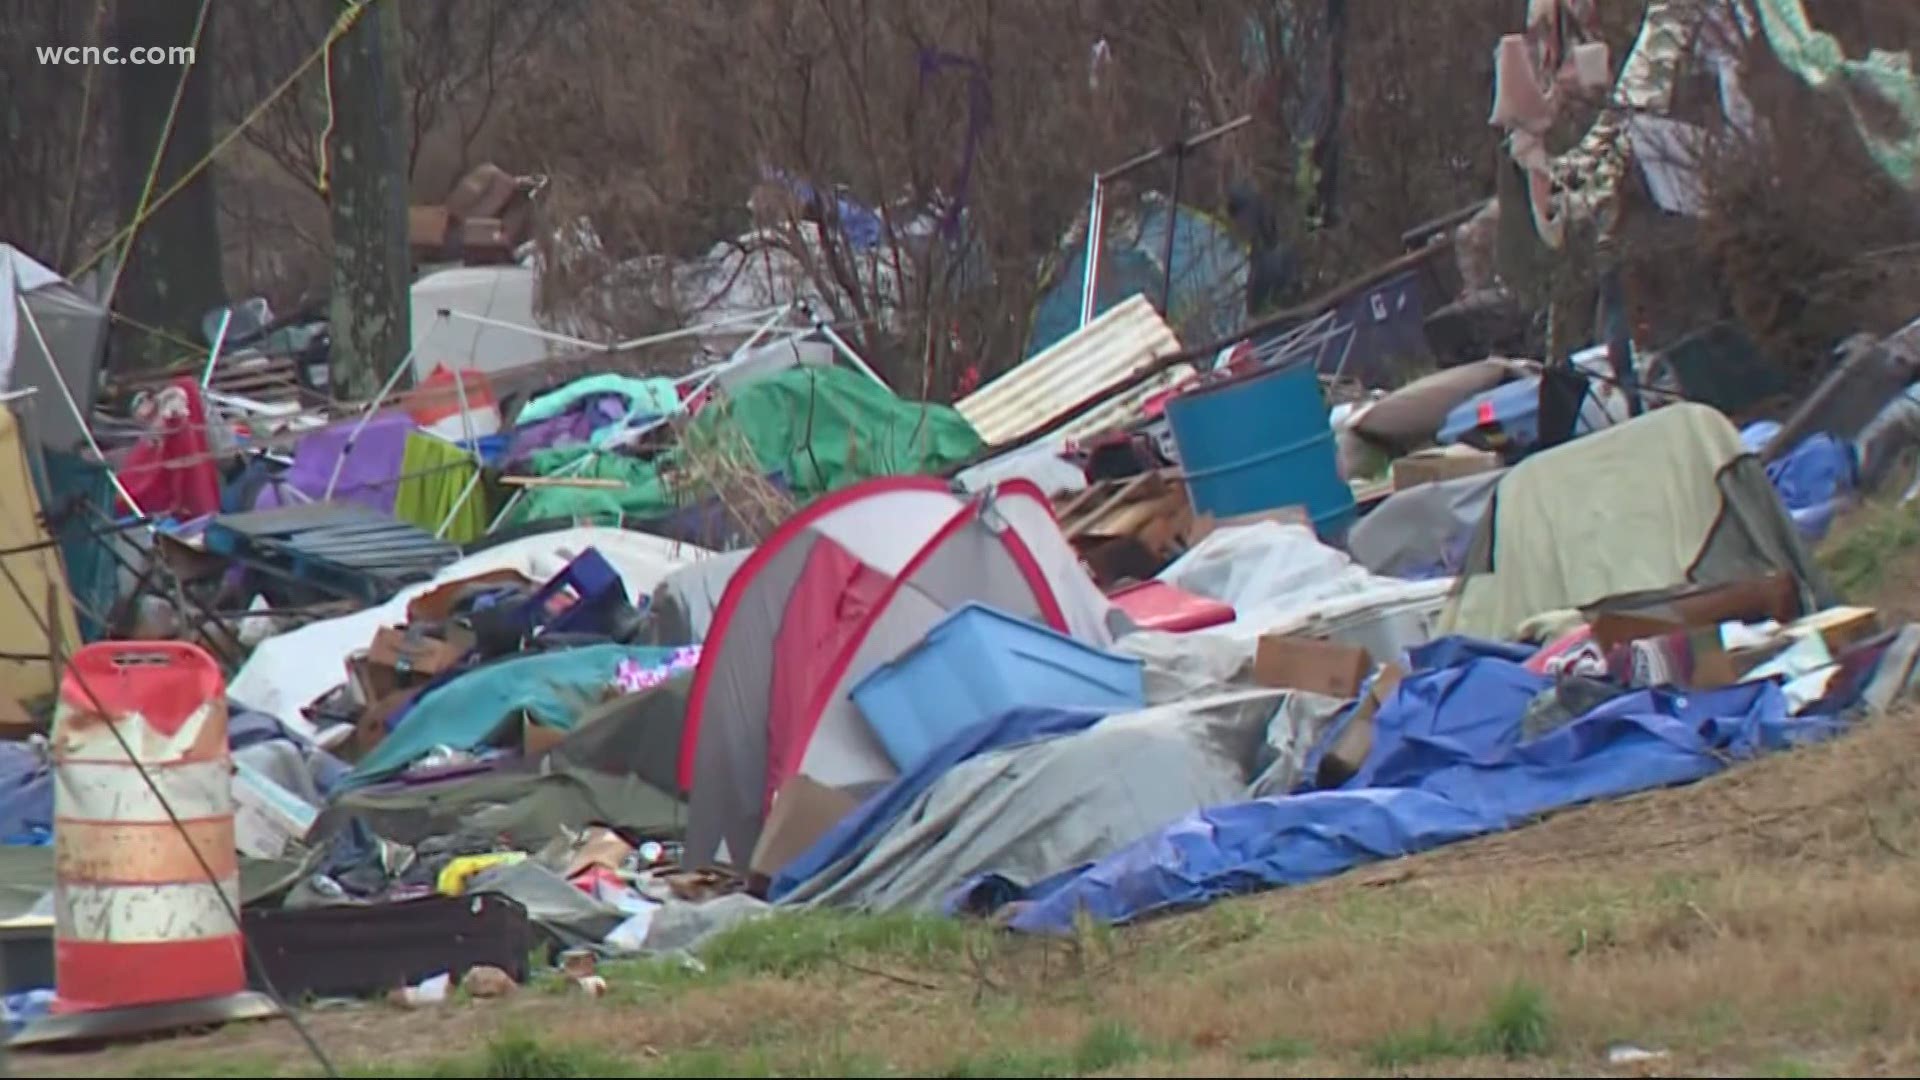 It comes after the county health director ordered a large encampment to vacate in February due to a rat infestation.